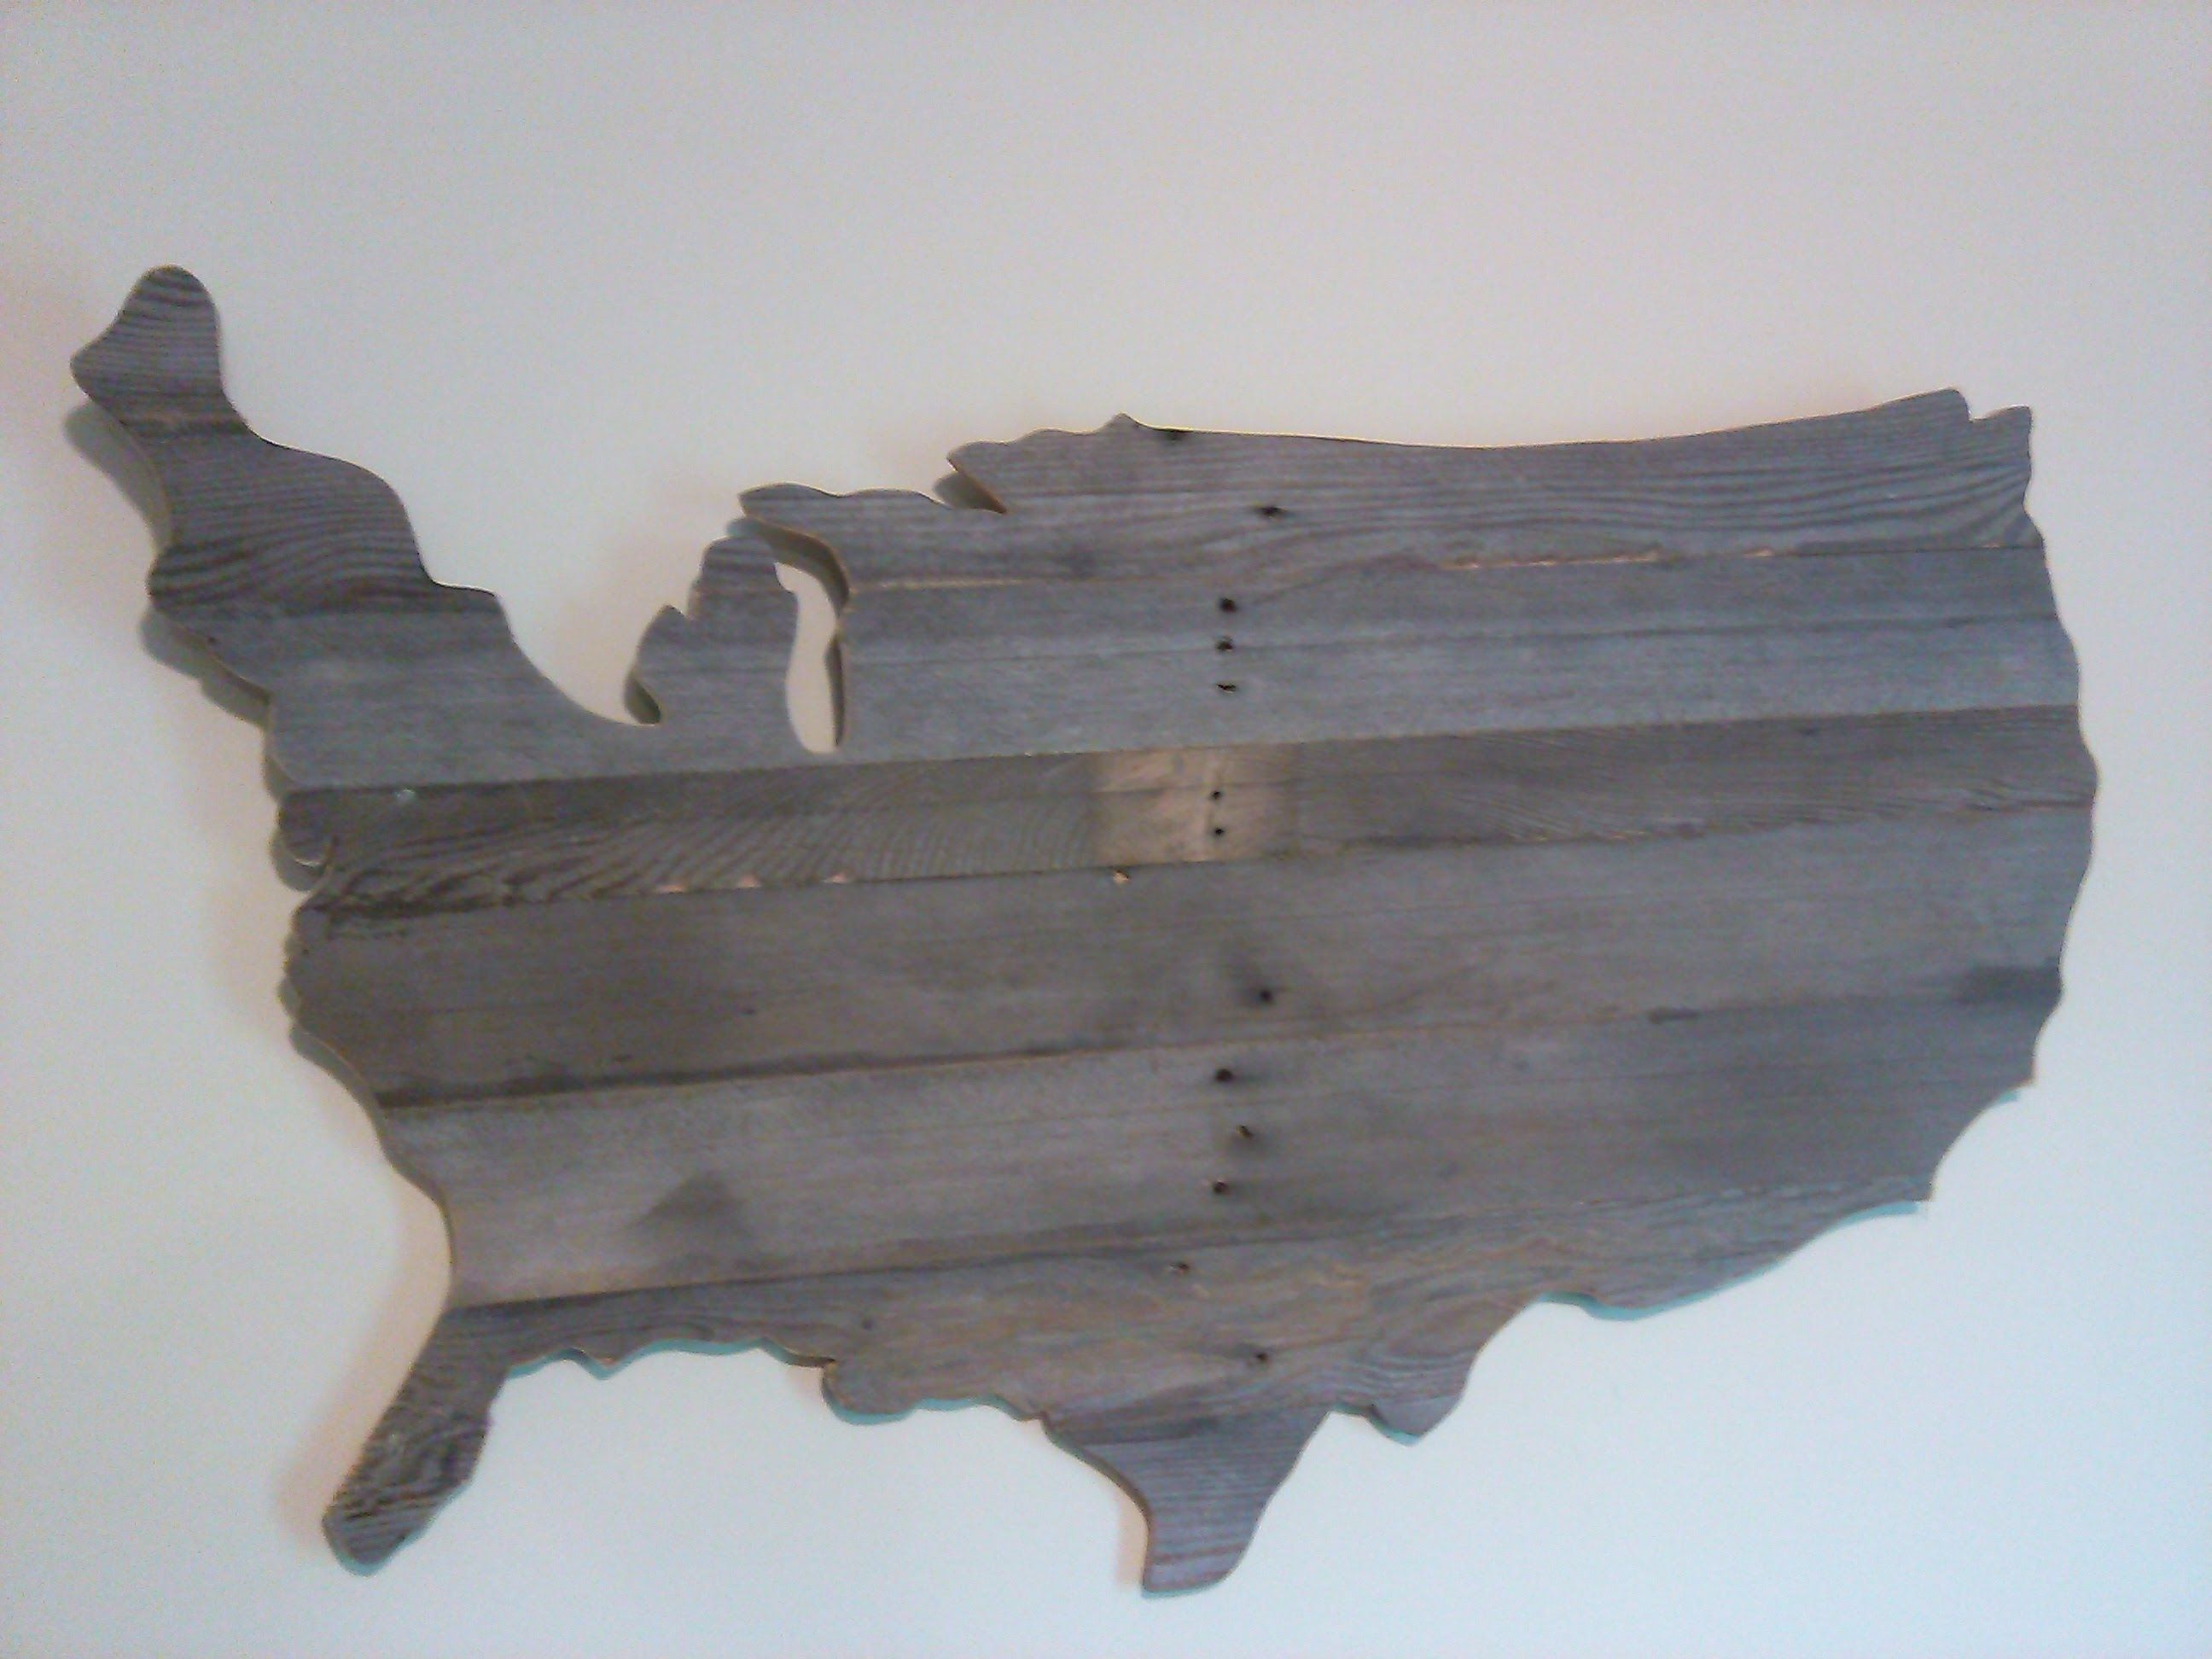 Us Map Wall Art Inside Trendy How To Make A Wooden Usa Map Wall Art Out Of Pallets – Youtube (View 1 of 15)